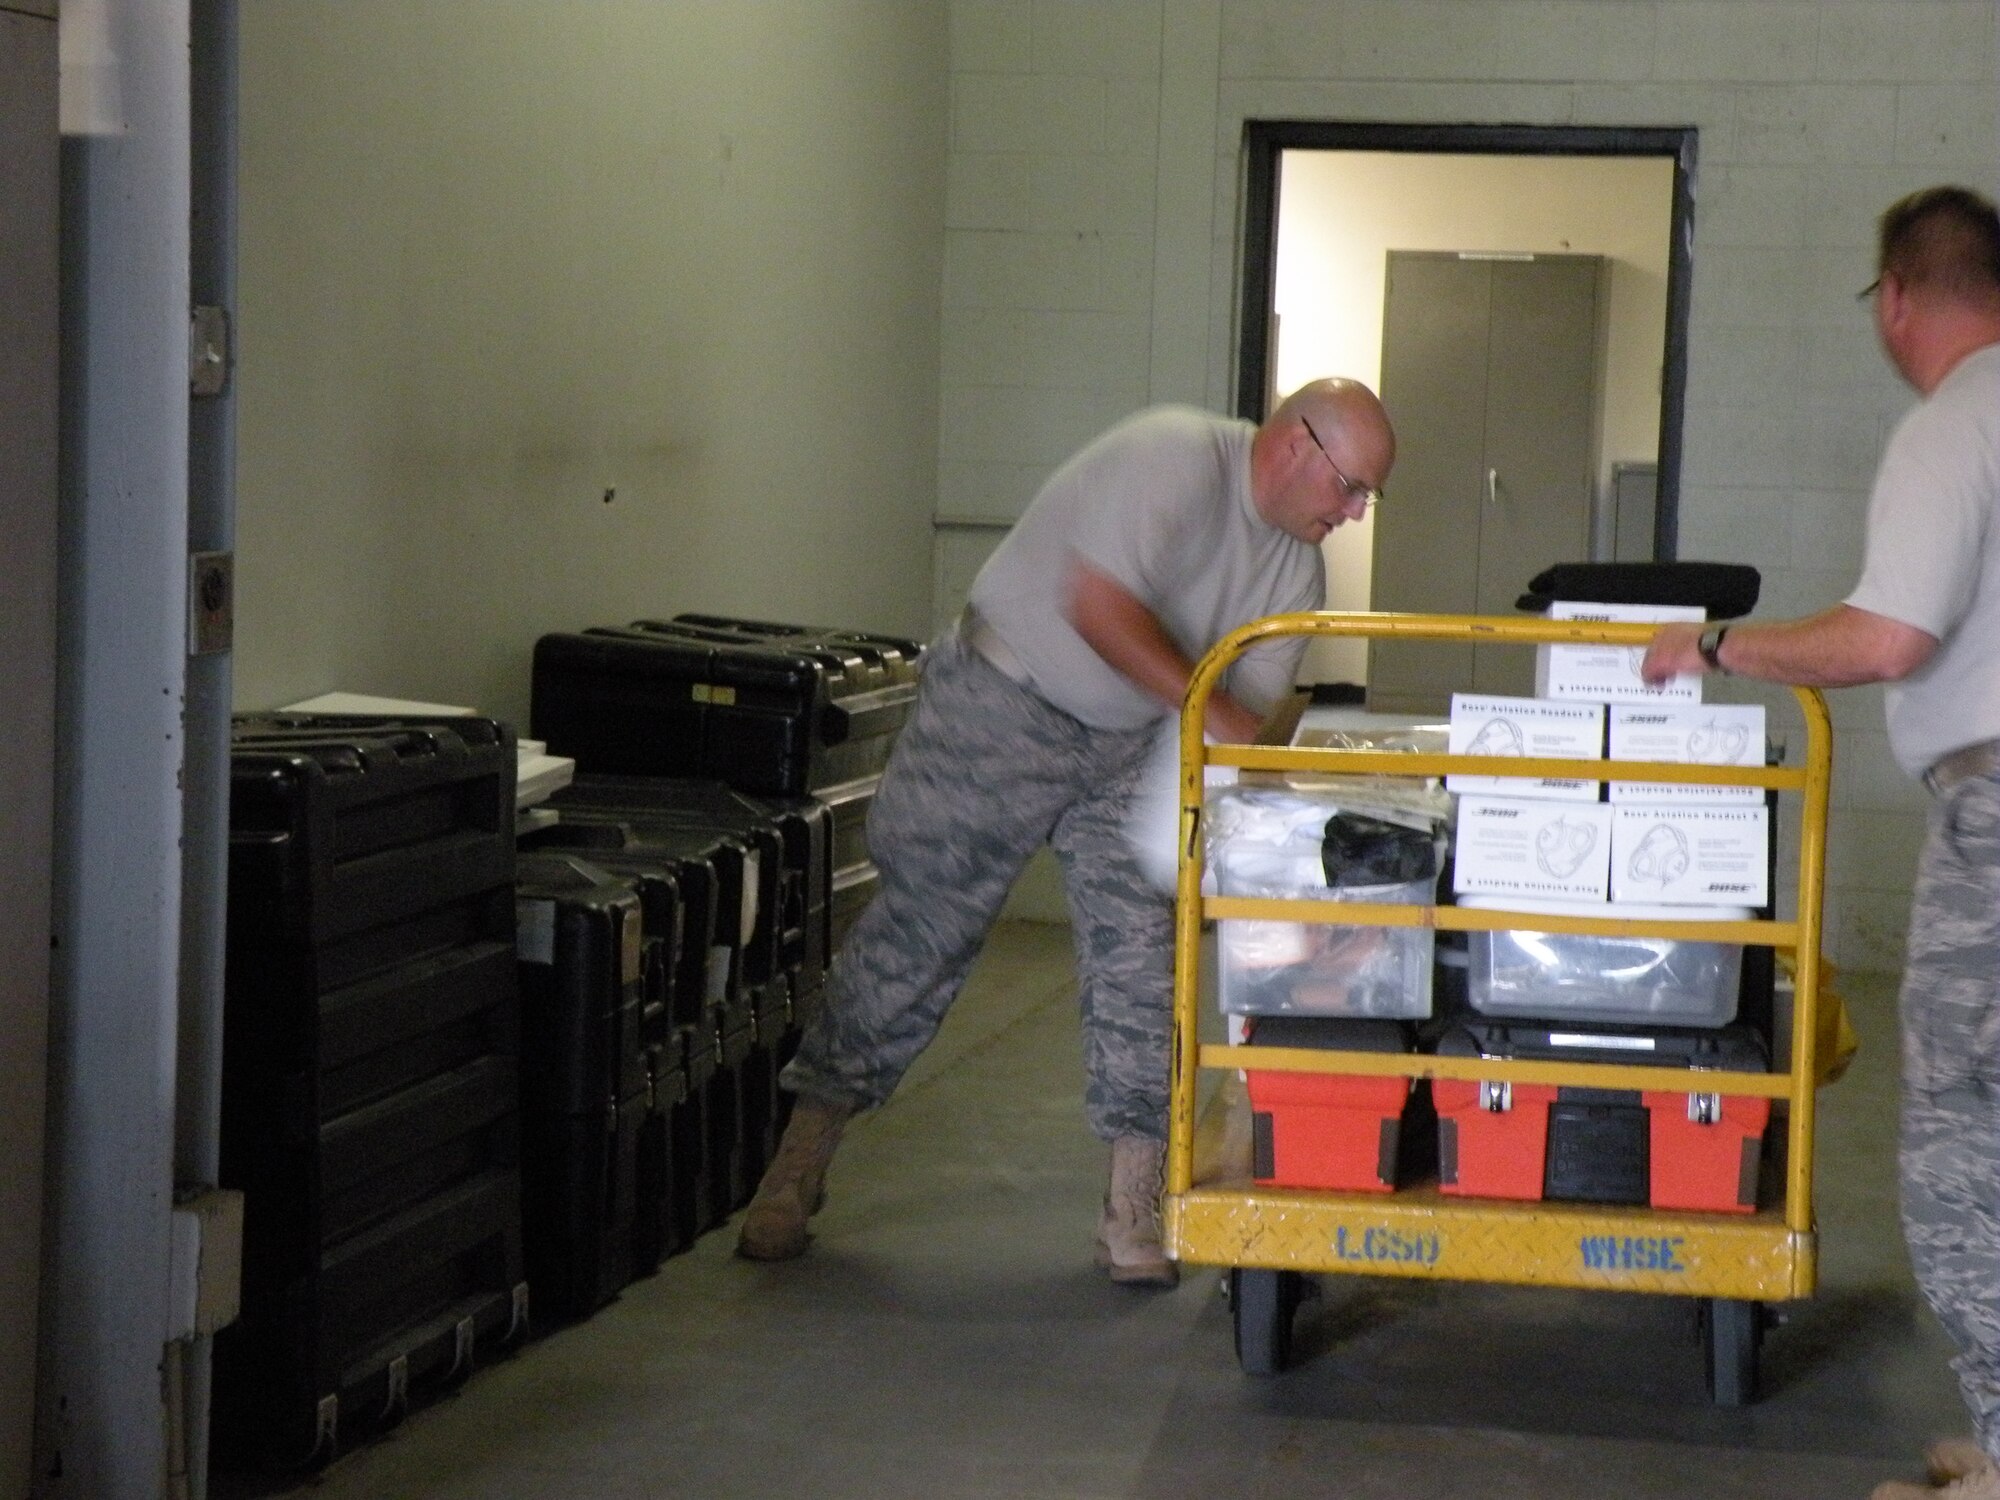 Chief Master Sgt. Steven L. Seaha, 103rd Operations Group Superintendent, works with Maj. Glenn Sherman, 103rd Air and Space Operations Squadron, as they unload the 118th Airlift Asquadron’s life support equipment into temporary storage within the 103rd Air and Space Operations Group’s administrative building at Bradley Air National Guard Base, East Granby, Conn. Aug. 26, 2010. The equipment was moved to make way for construction efforts. (U.S. Air Force photo by Staff Sgt. Hope Morris)